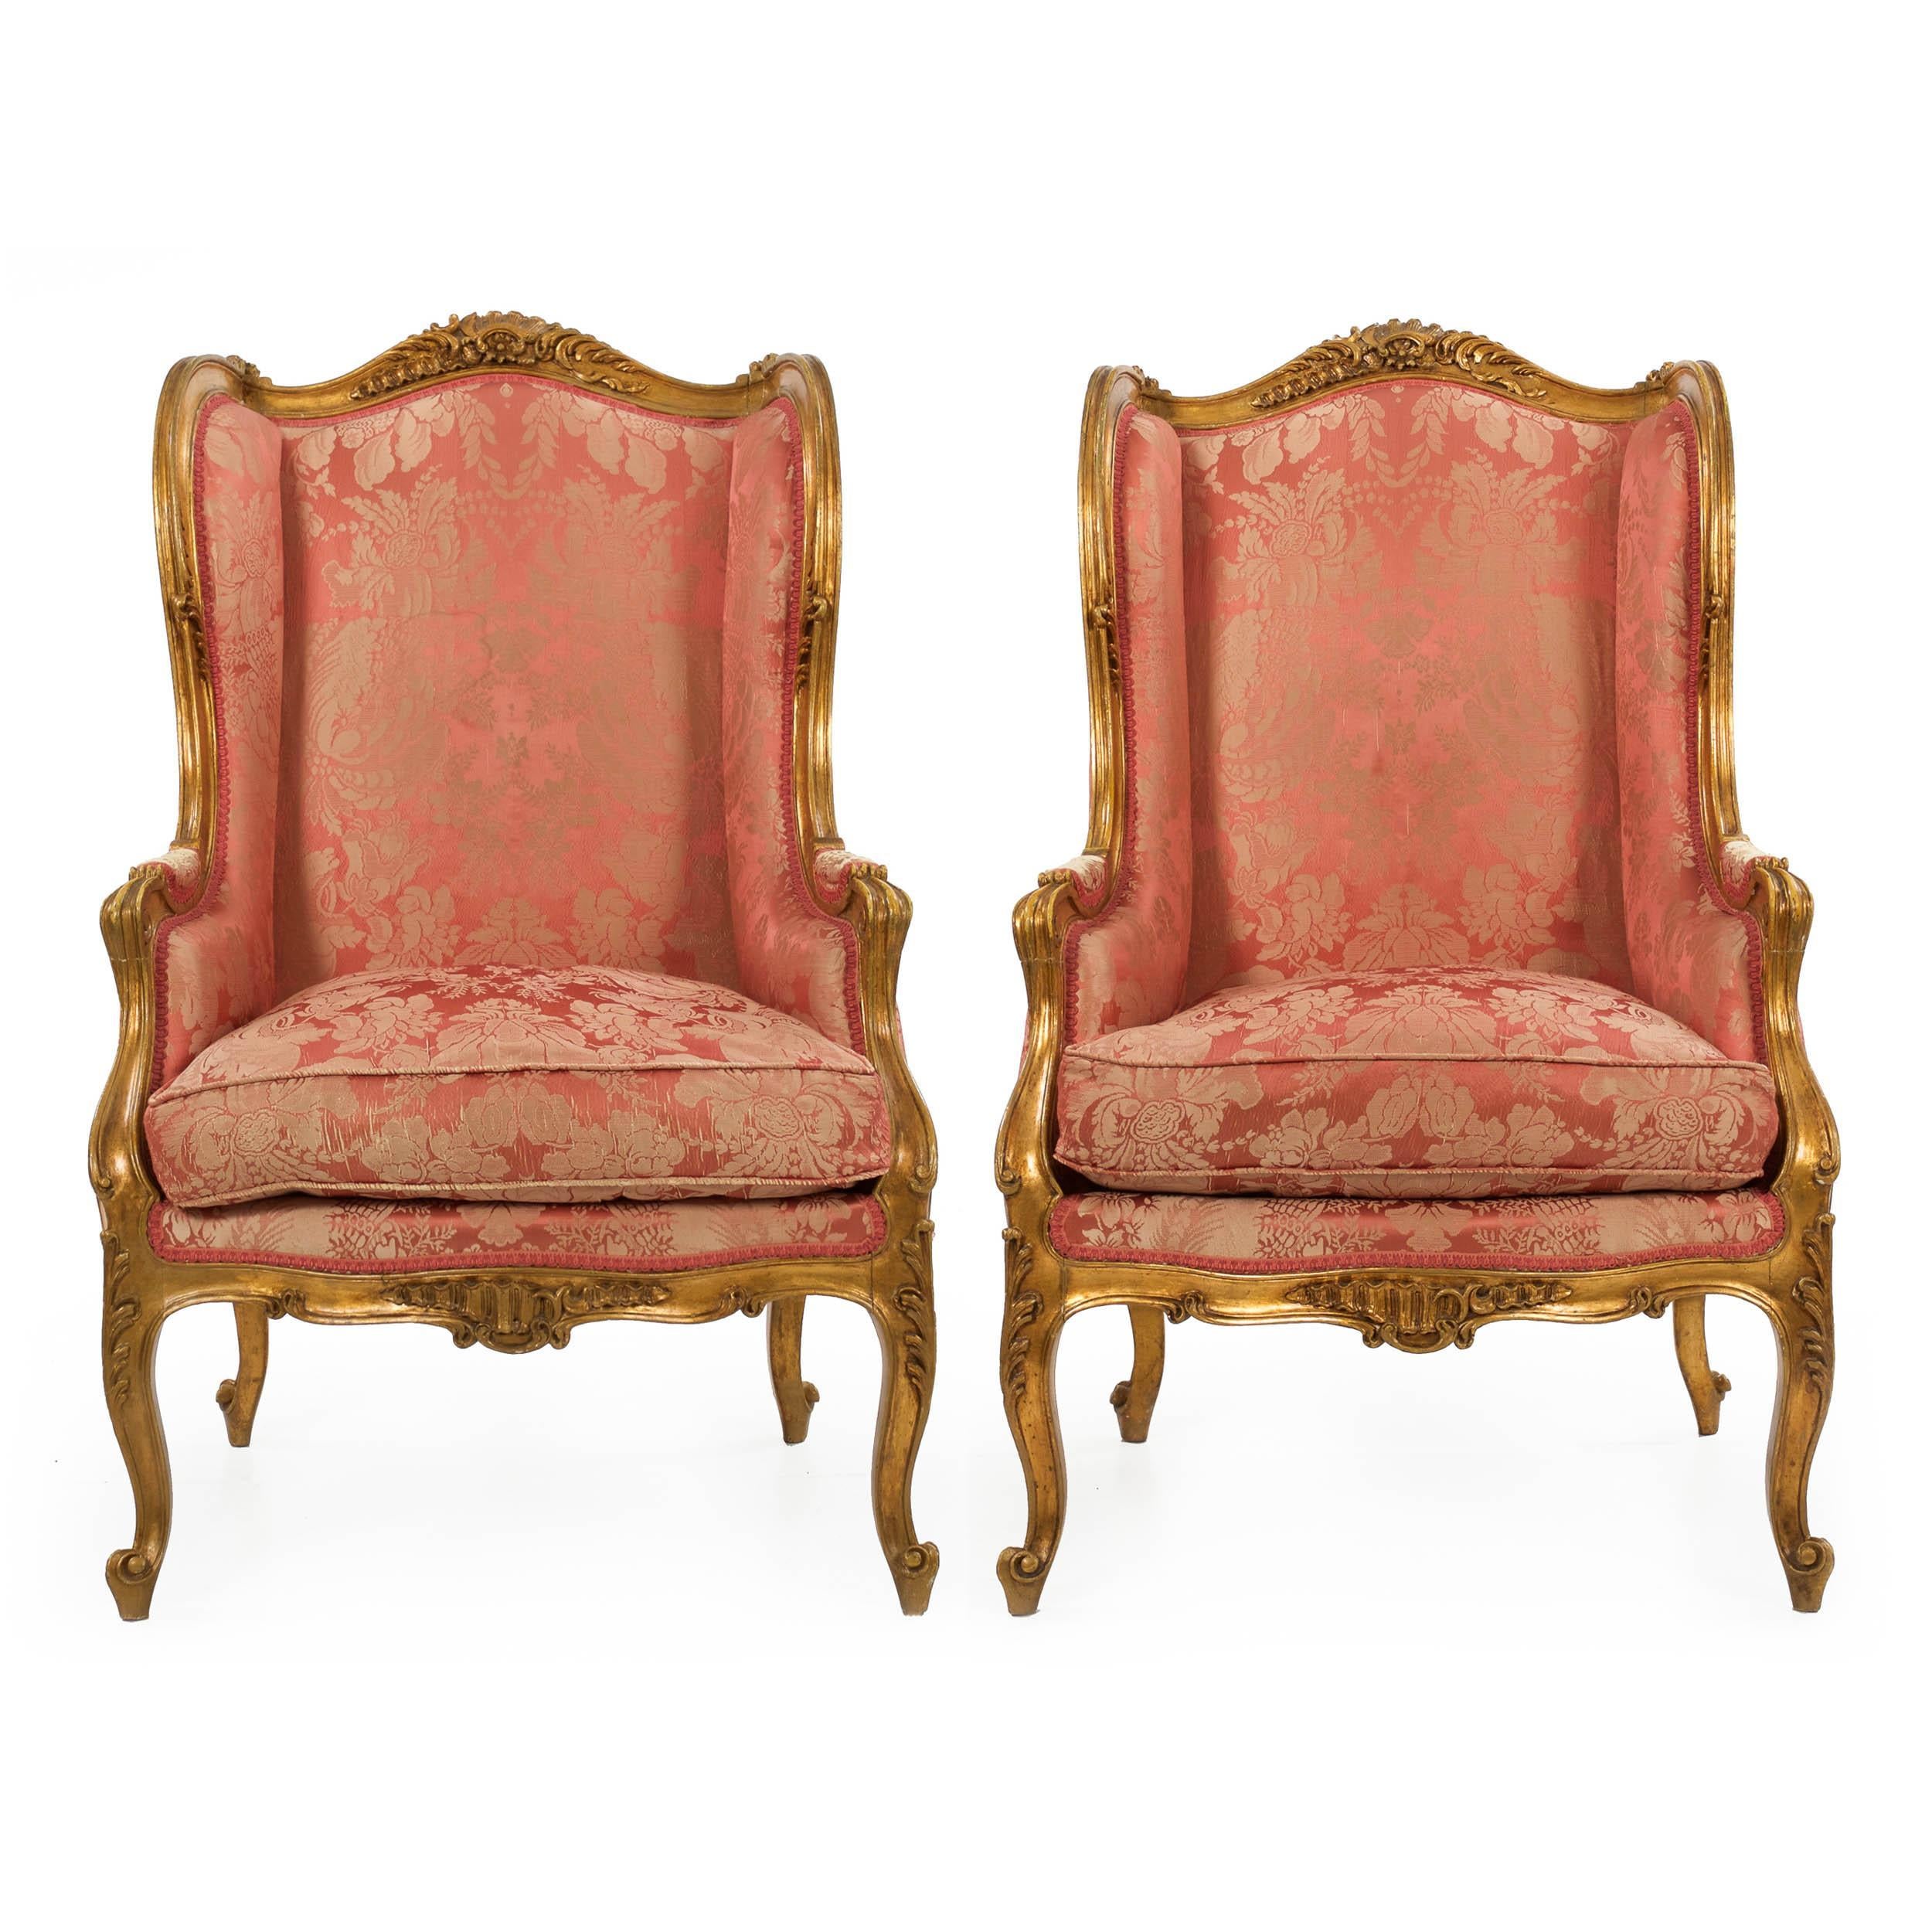 A gorgeous pair of French bergeres in the Louis XV taste, they were crafted circa the 1880s and exhibit crisp carvings inspired by the Rococo motifs of a century prior. The crest, apron and knees are most intricately embellished with integral